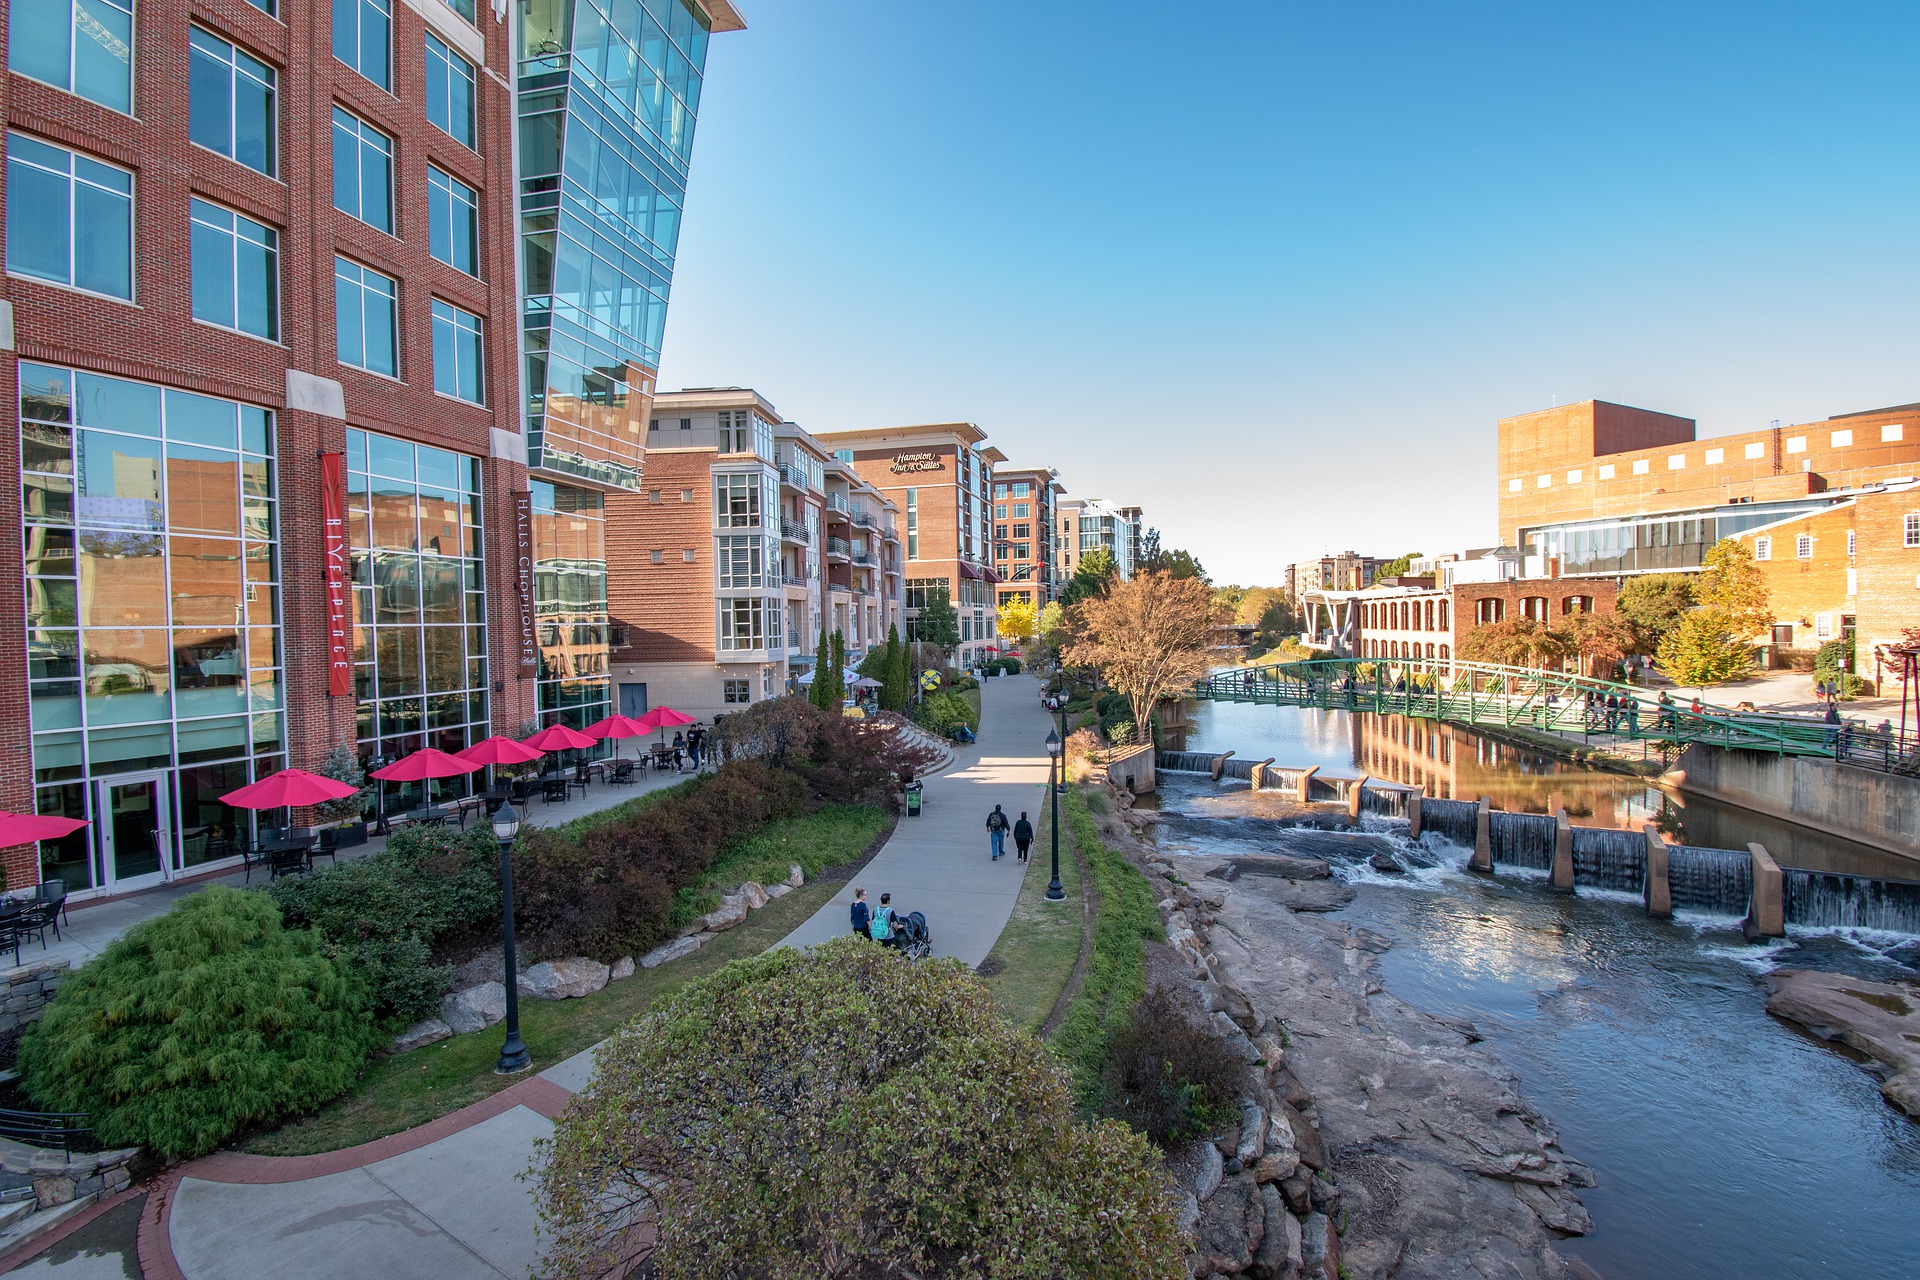 Arts, Museums and Exhibition Center – This is Why We Love Greenville Downtown